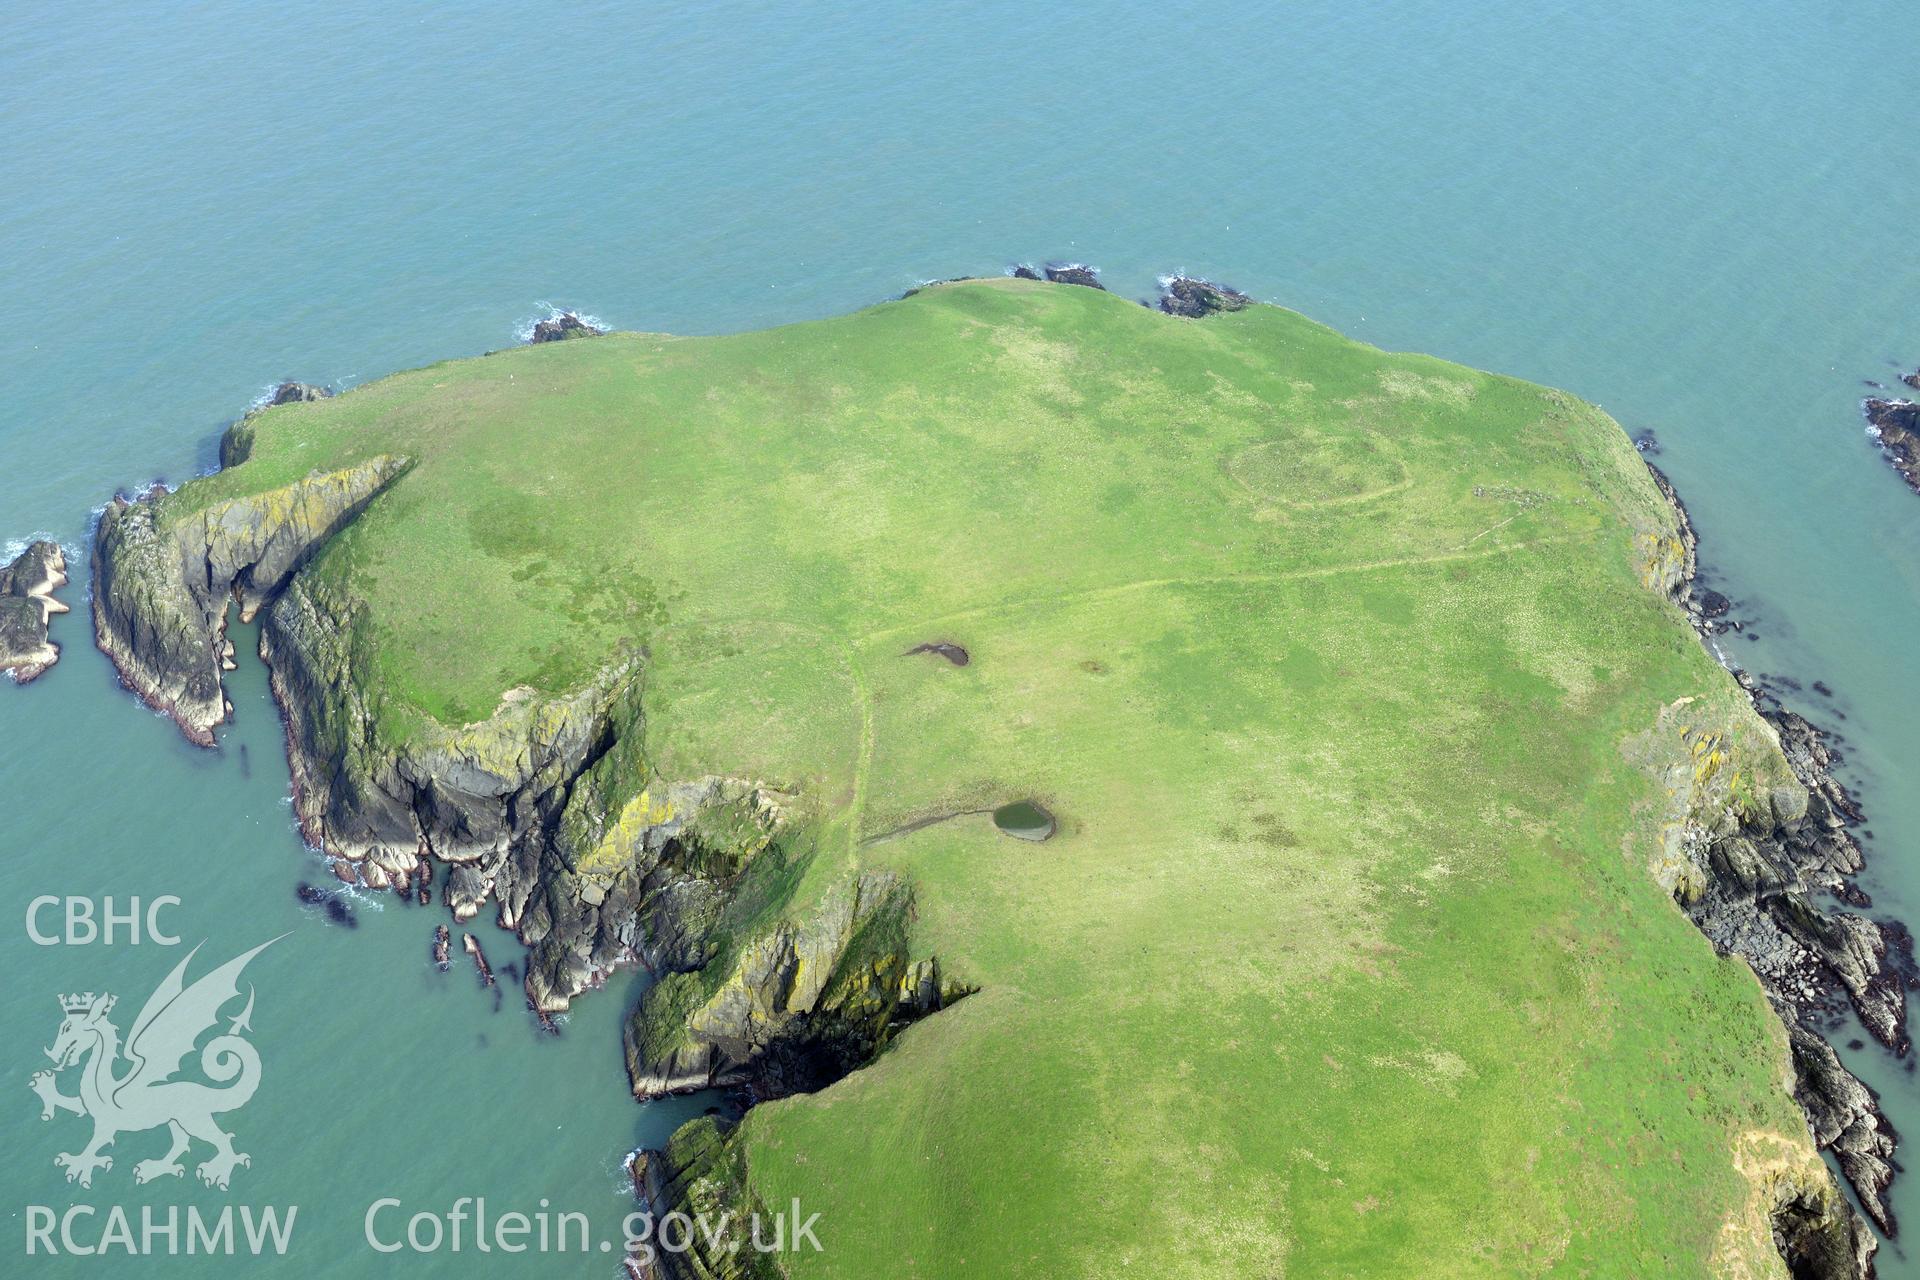 Aerial photography of Cardigan Island taken on 27th March 2017. Baseline aerial reconnaissance survey for the CHERISH Project. ? Crown: CHERISH PROJECT 2017. Produced with EU funds through the Ireland Wales Co-operation Programme 2014-2020. All material made freely available through the Open Government Licence.